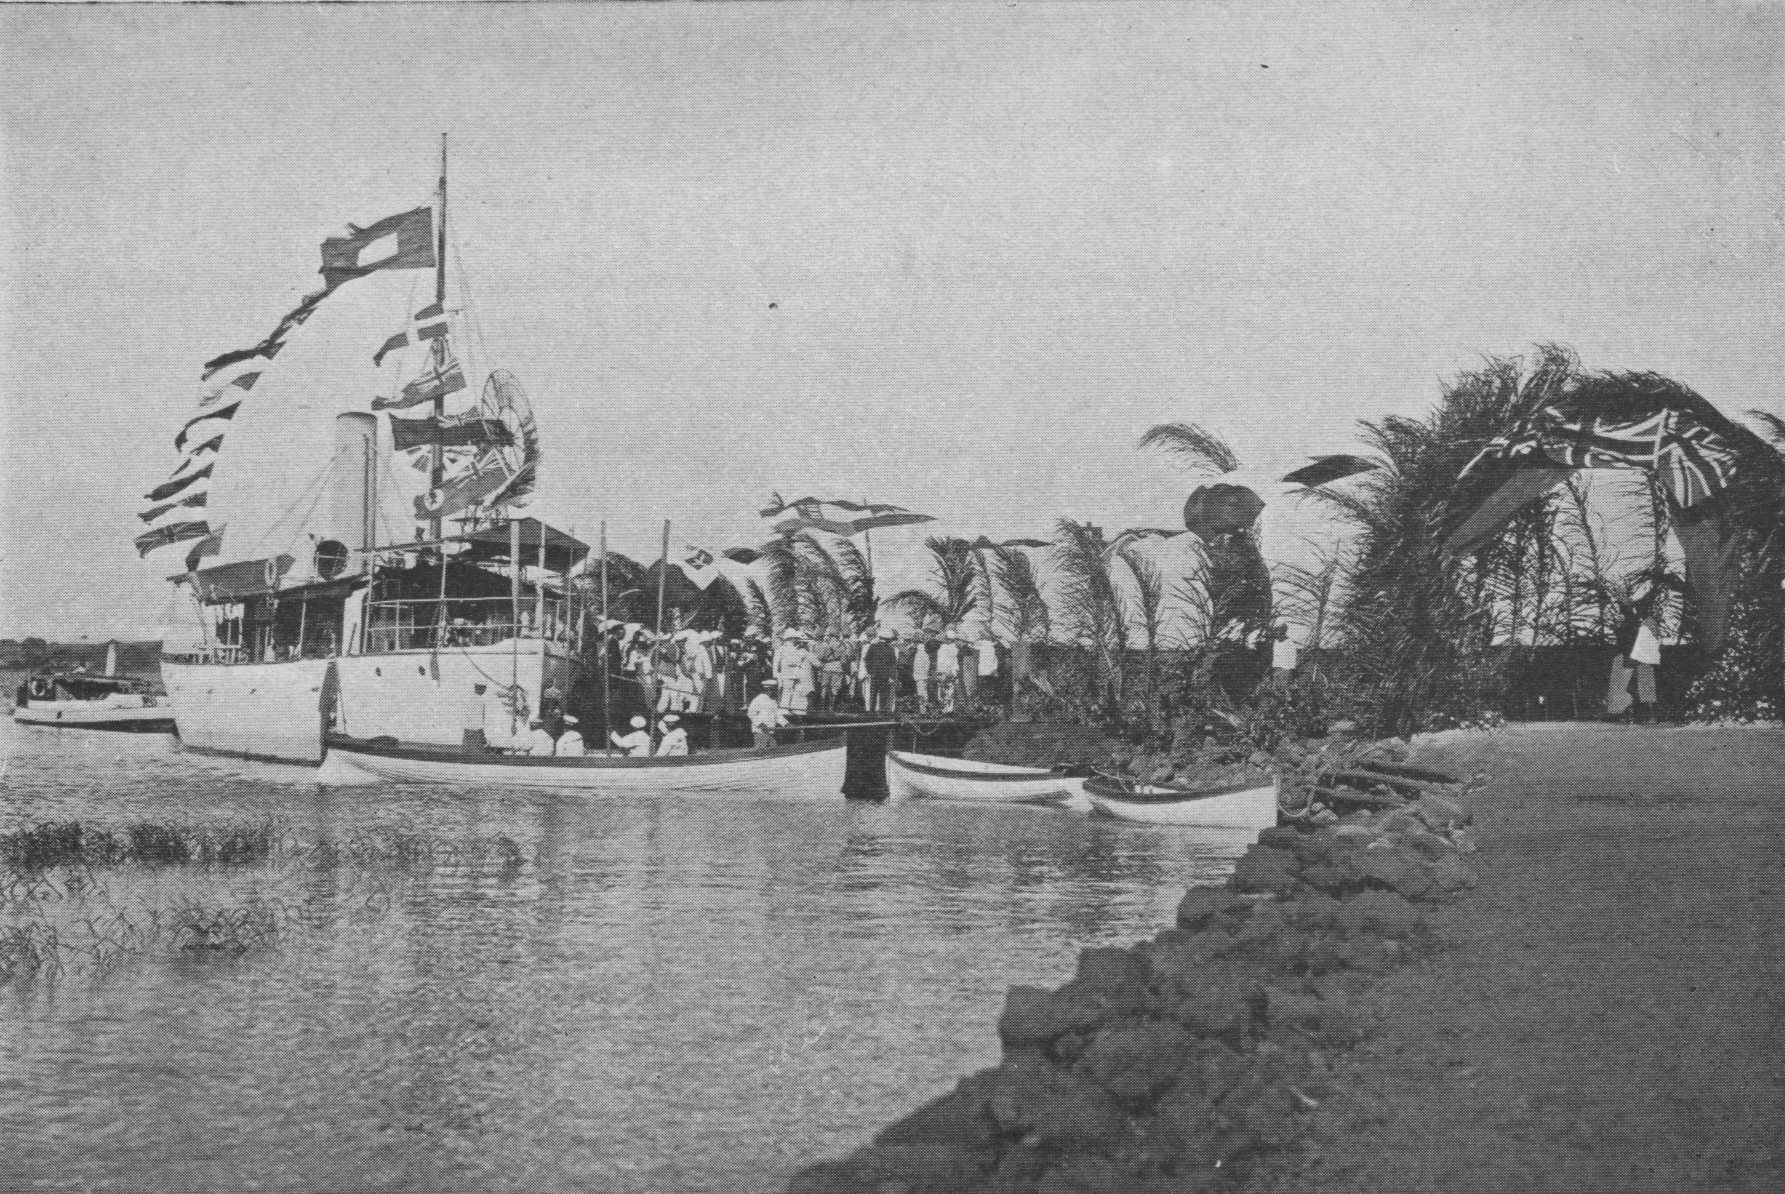 steamboat with flags at a dock